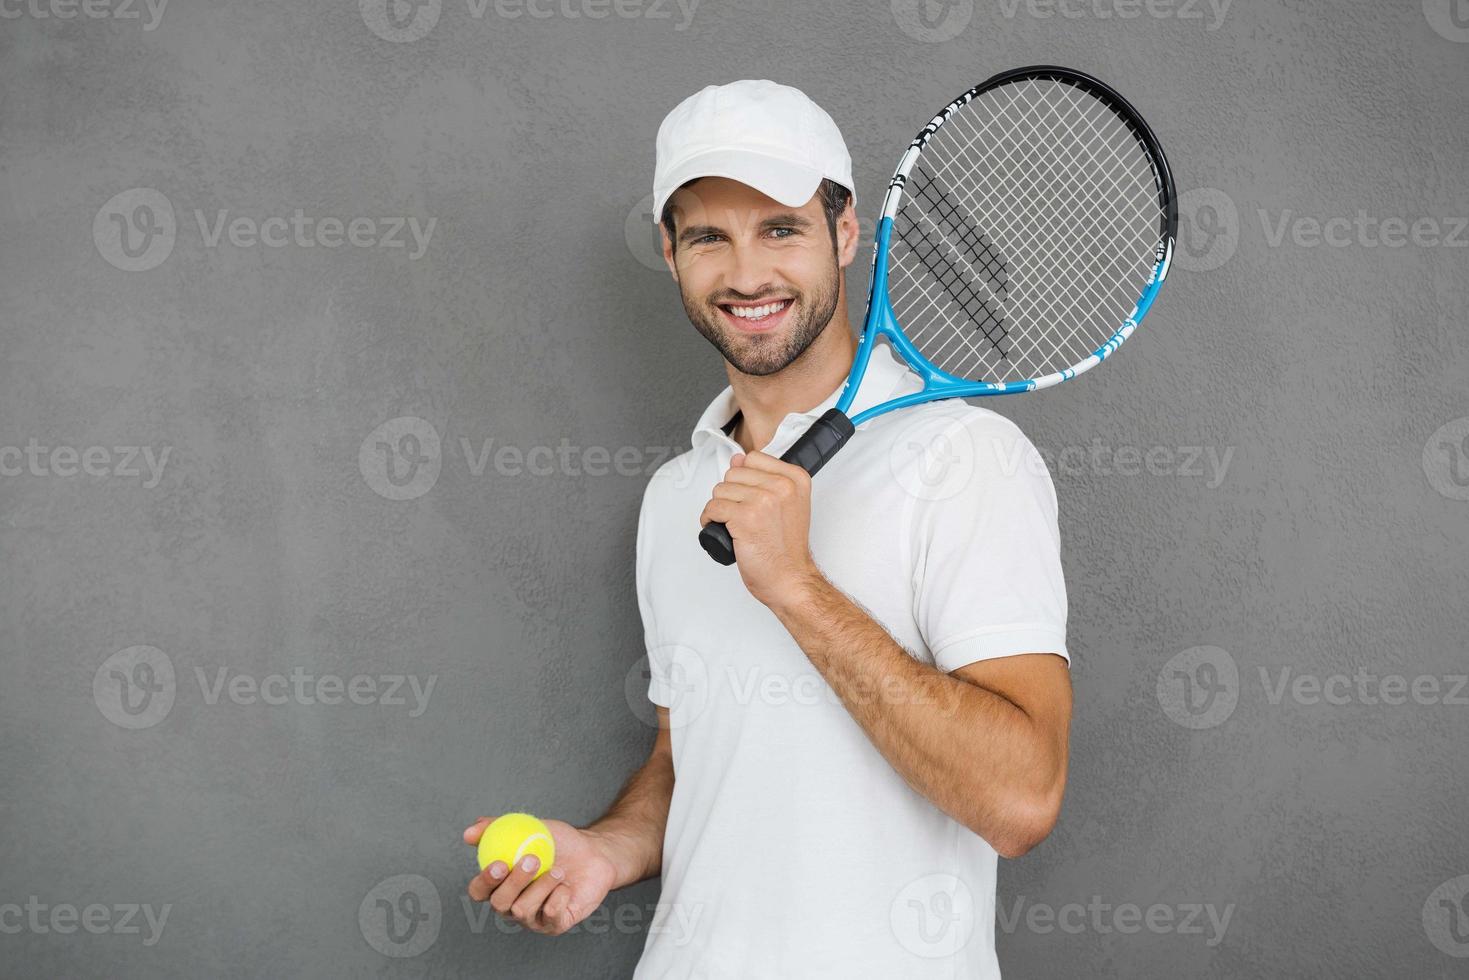 This game is more than hobby Happy young man in sports clothes carrying tennis racket on his shoulder and smiling while standing against grey background photo